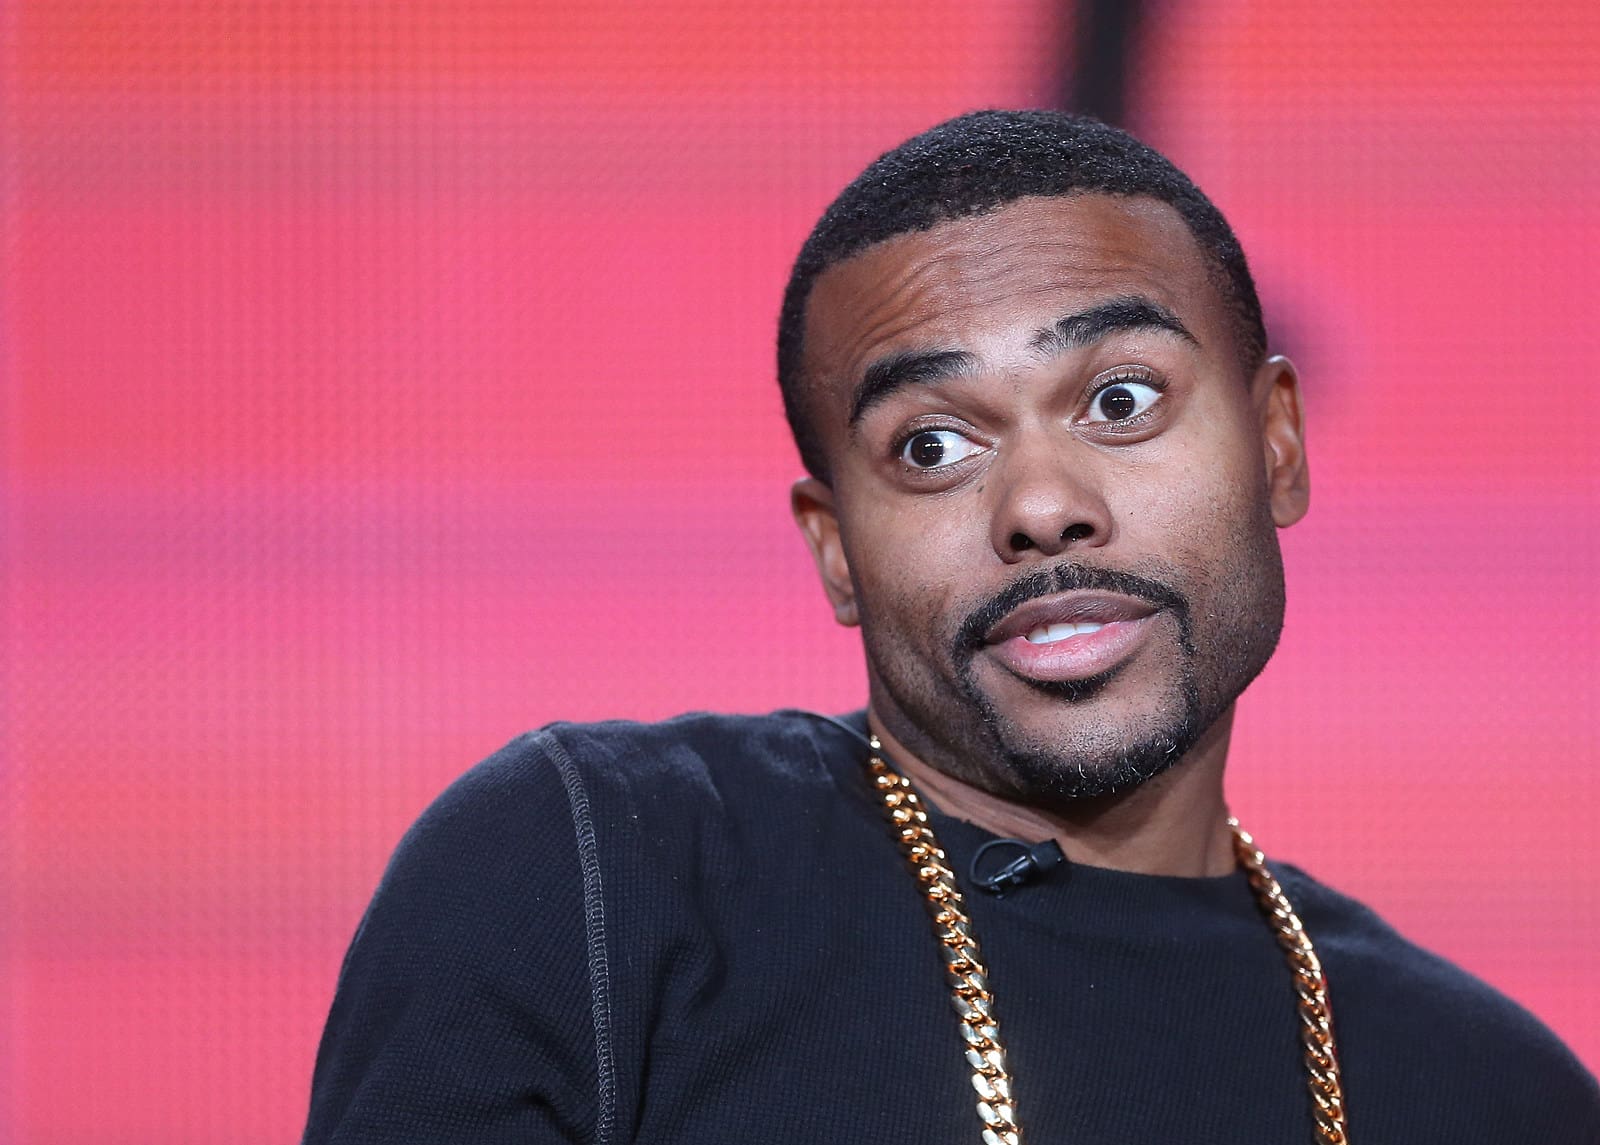 Lil Duval Receives Backlash For Debating The Preference Subject Triggered By Chris Brown's Latest Lyrics